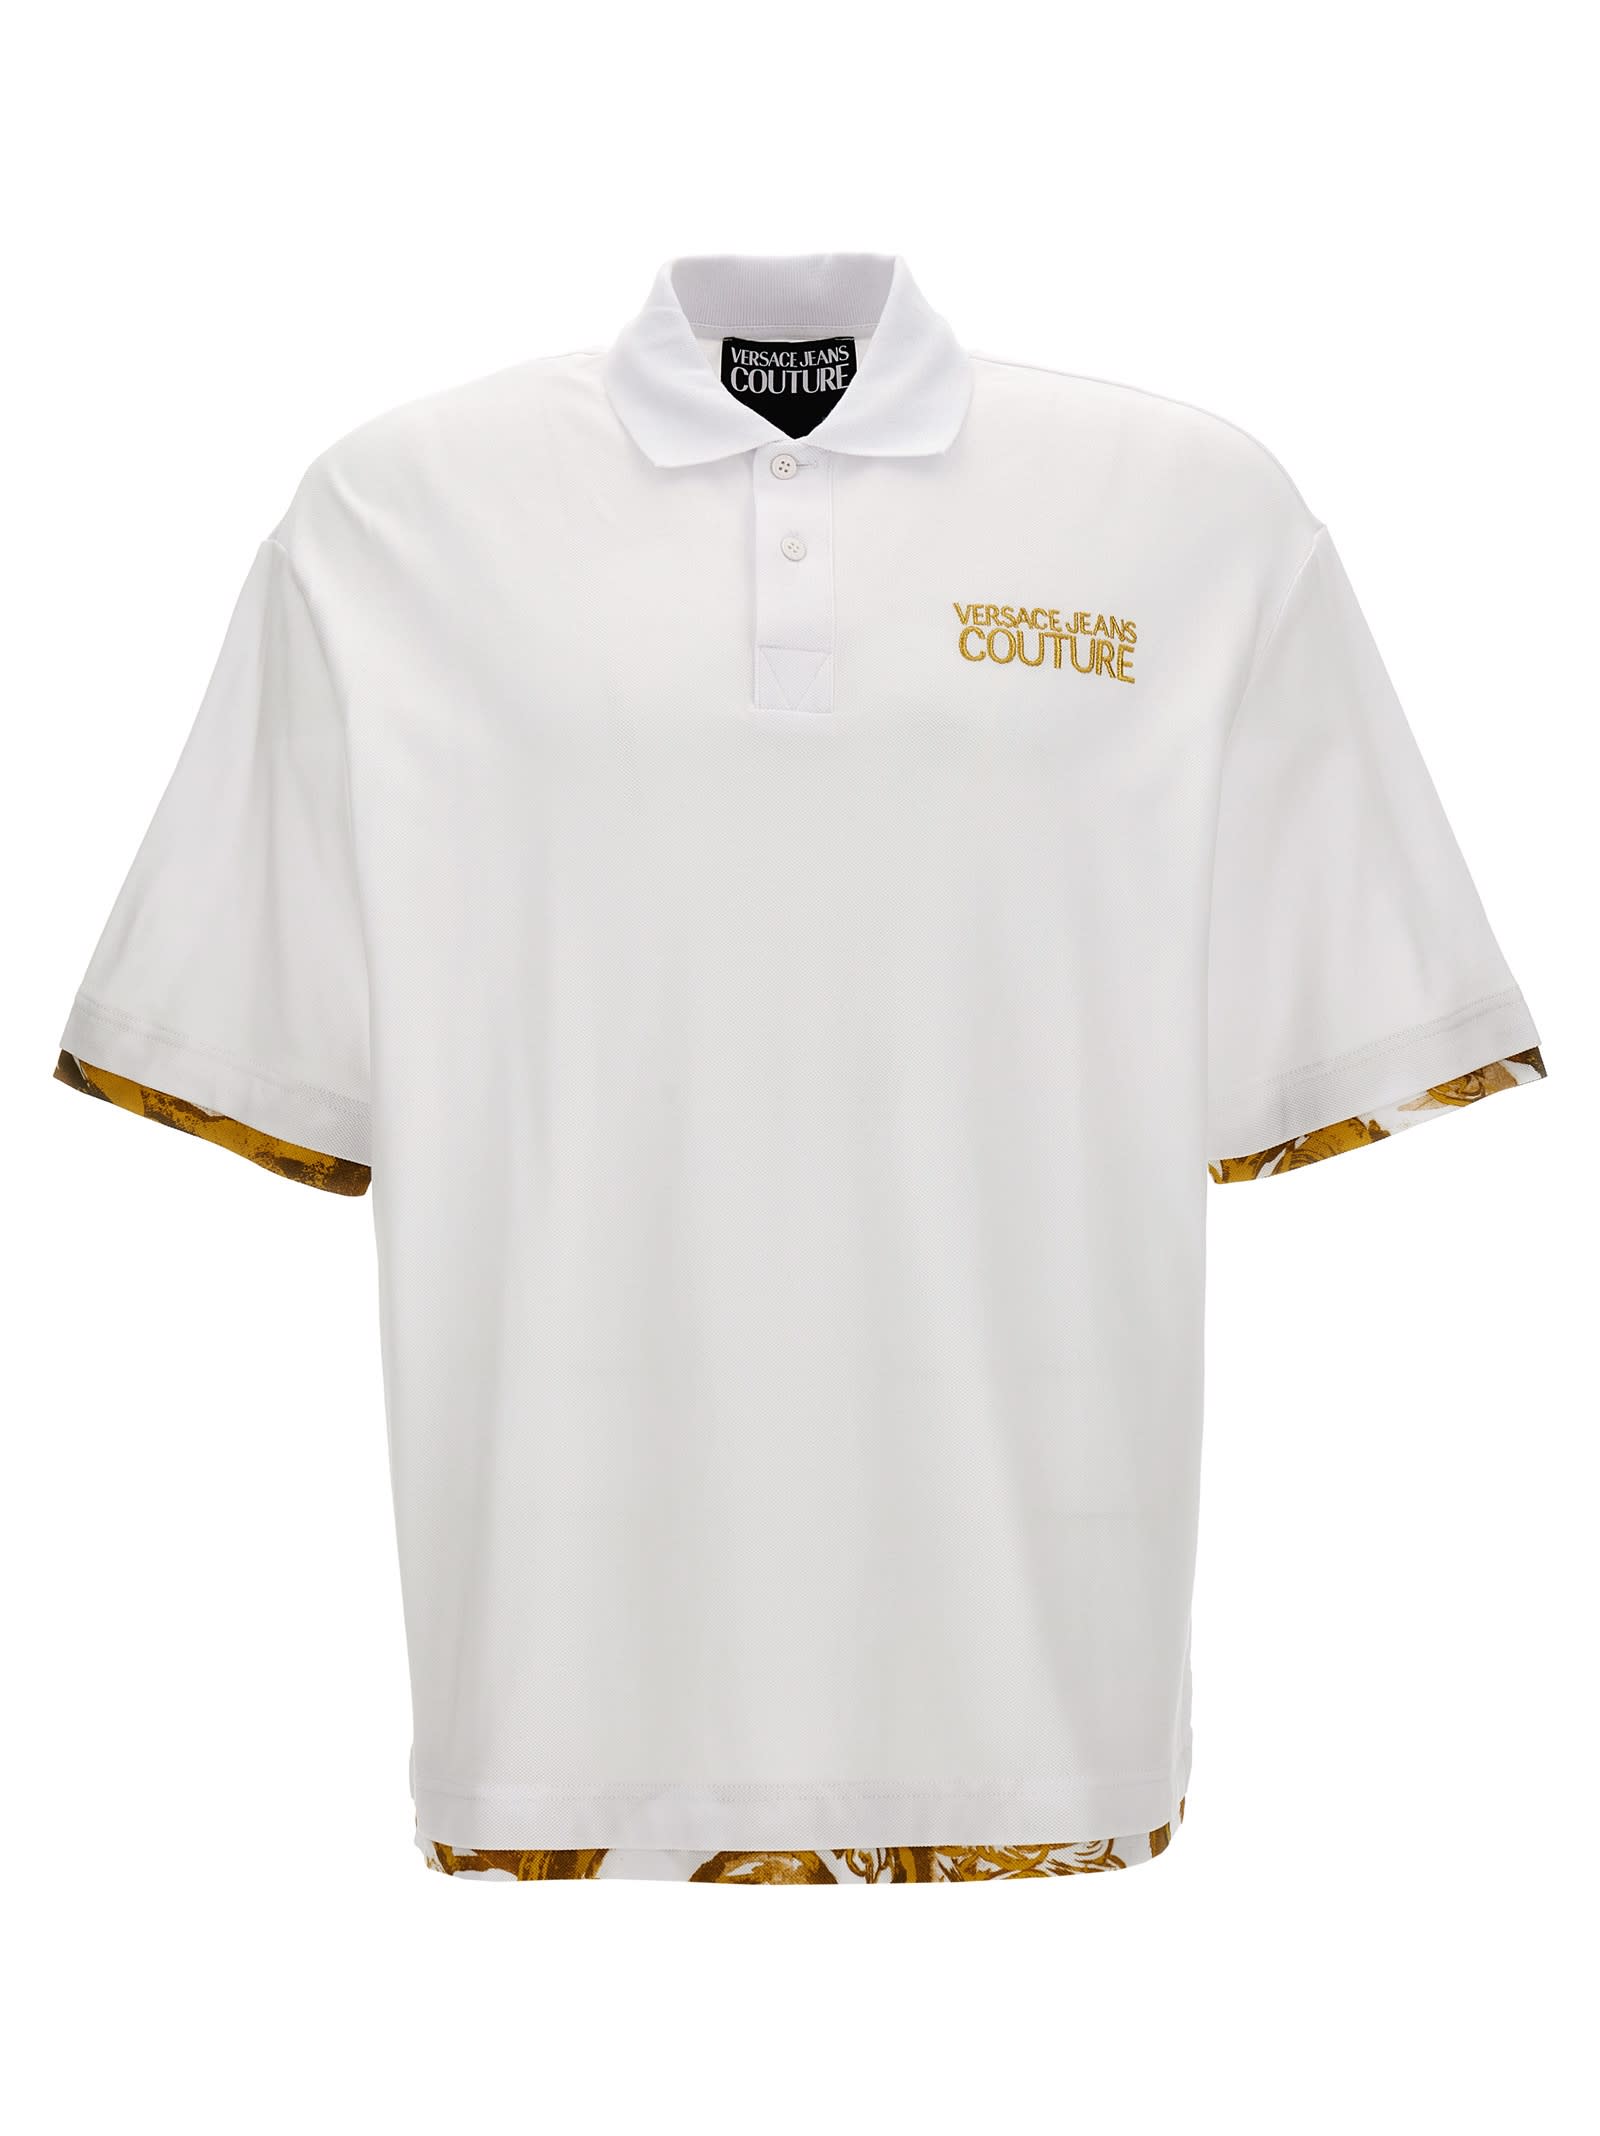 VERSACE JEANS COUTURE BAROCCO POLO SHIRT